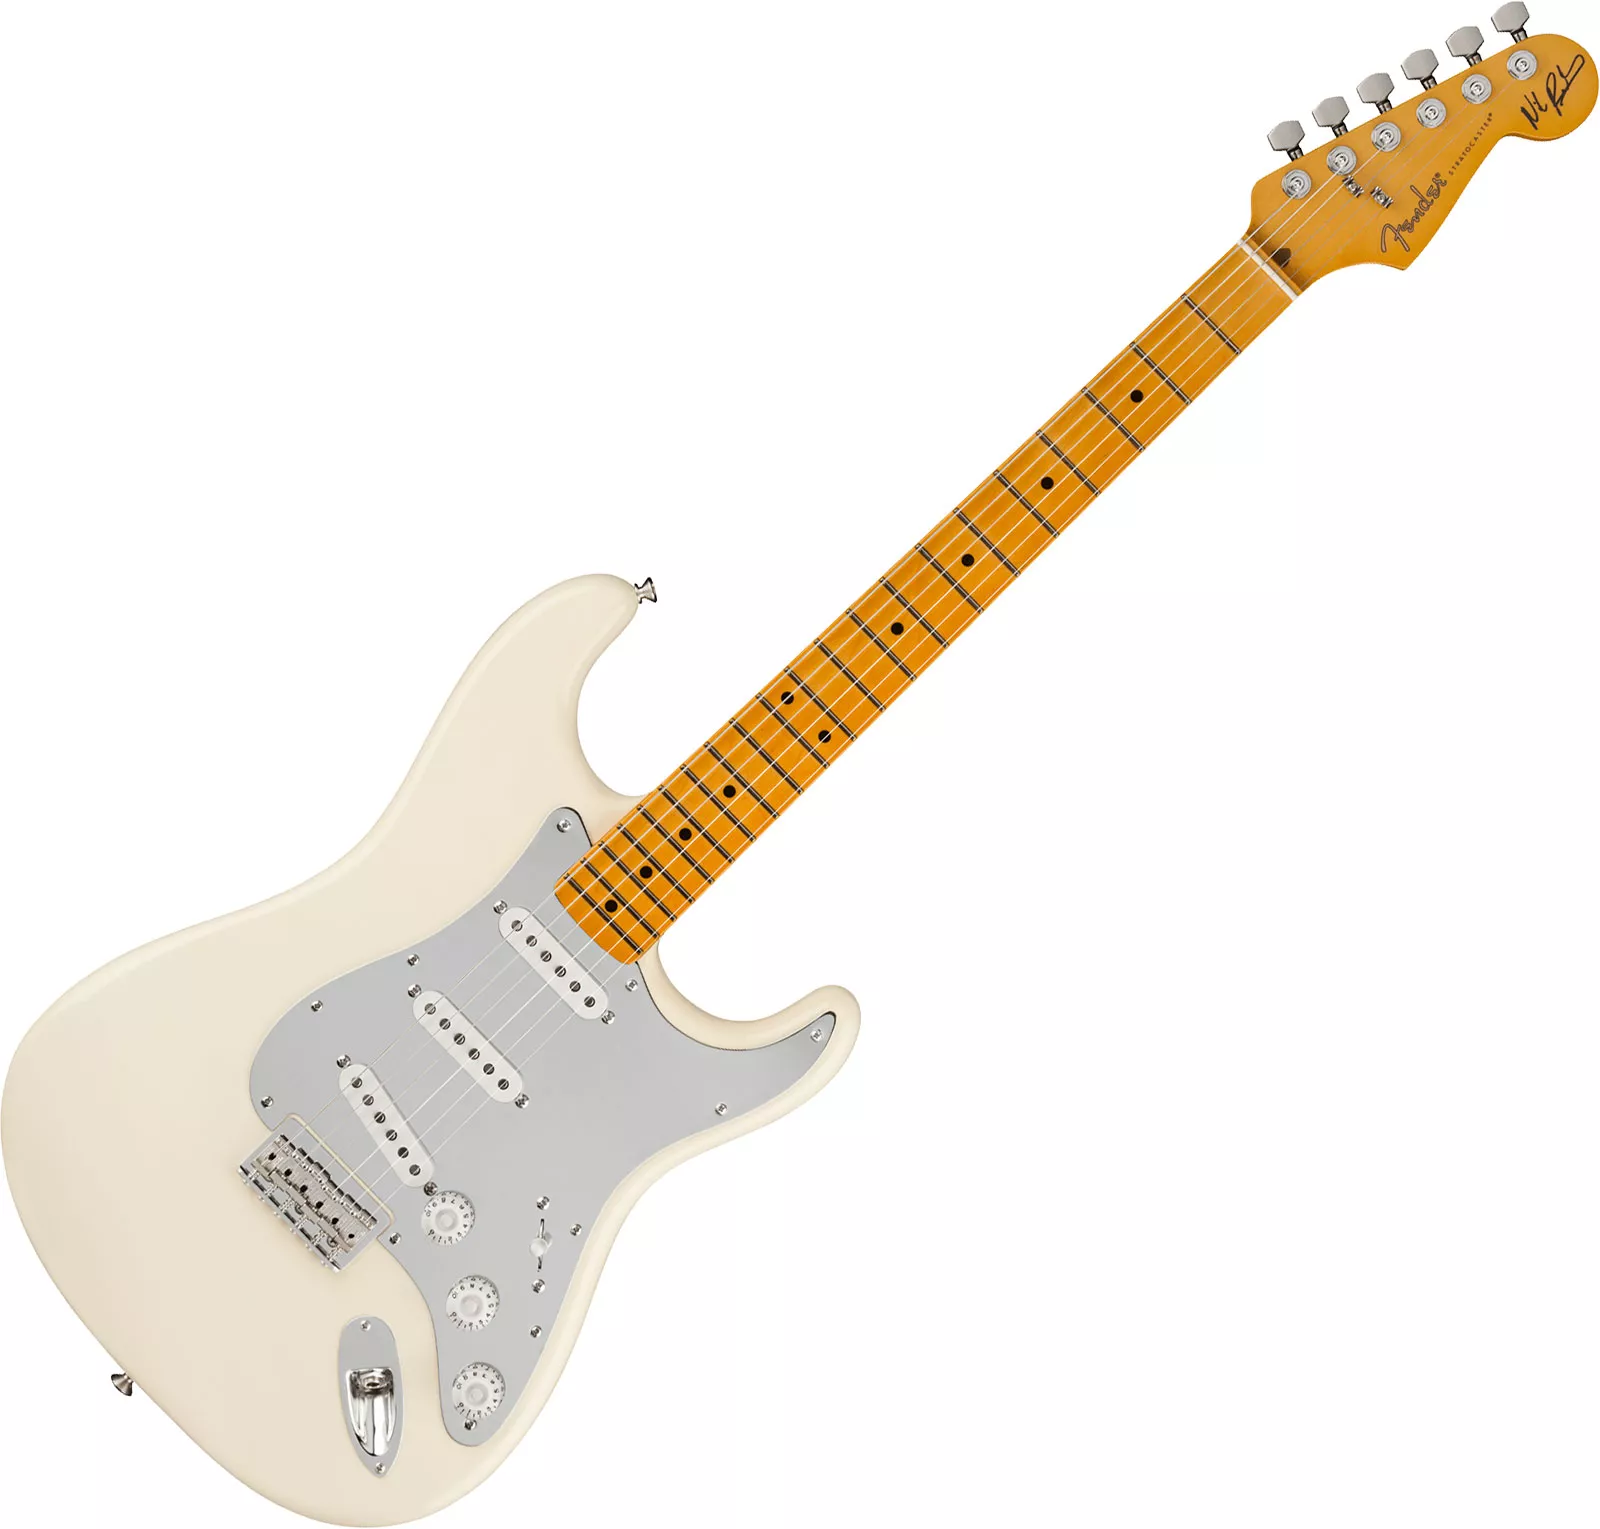 Delegation Sea slug Probably Fender Nile Rodgers Hitmaker Stratocaster (USA, MN) - olympic white Solid  body electric guitar white